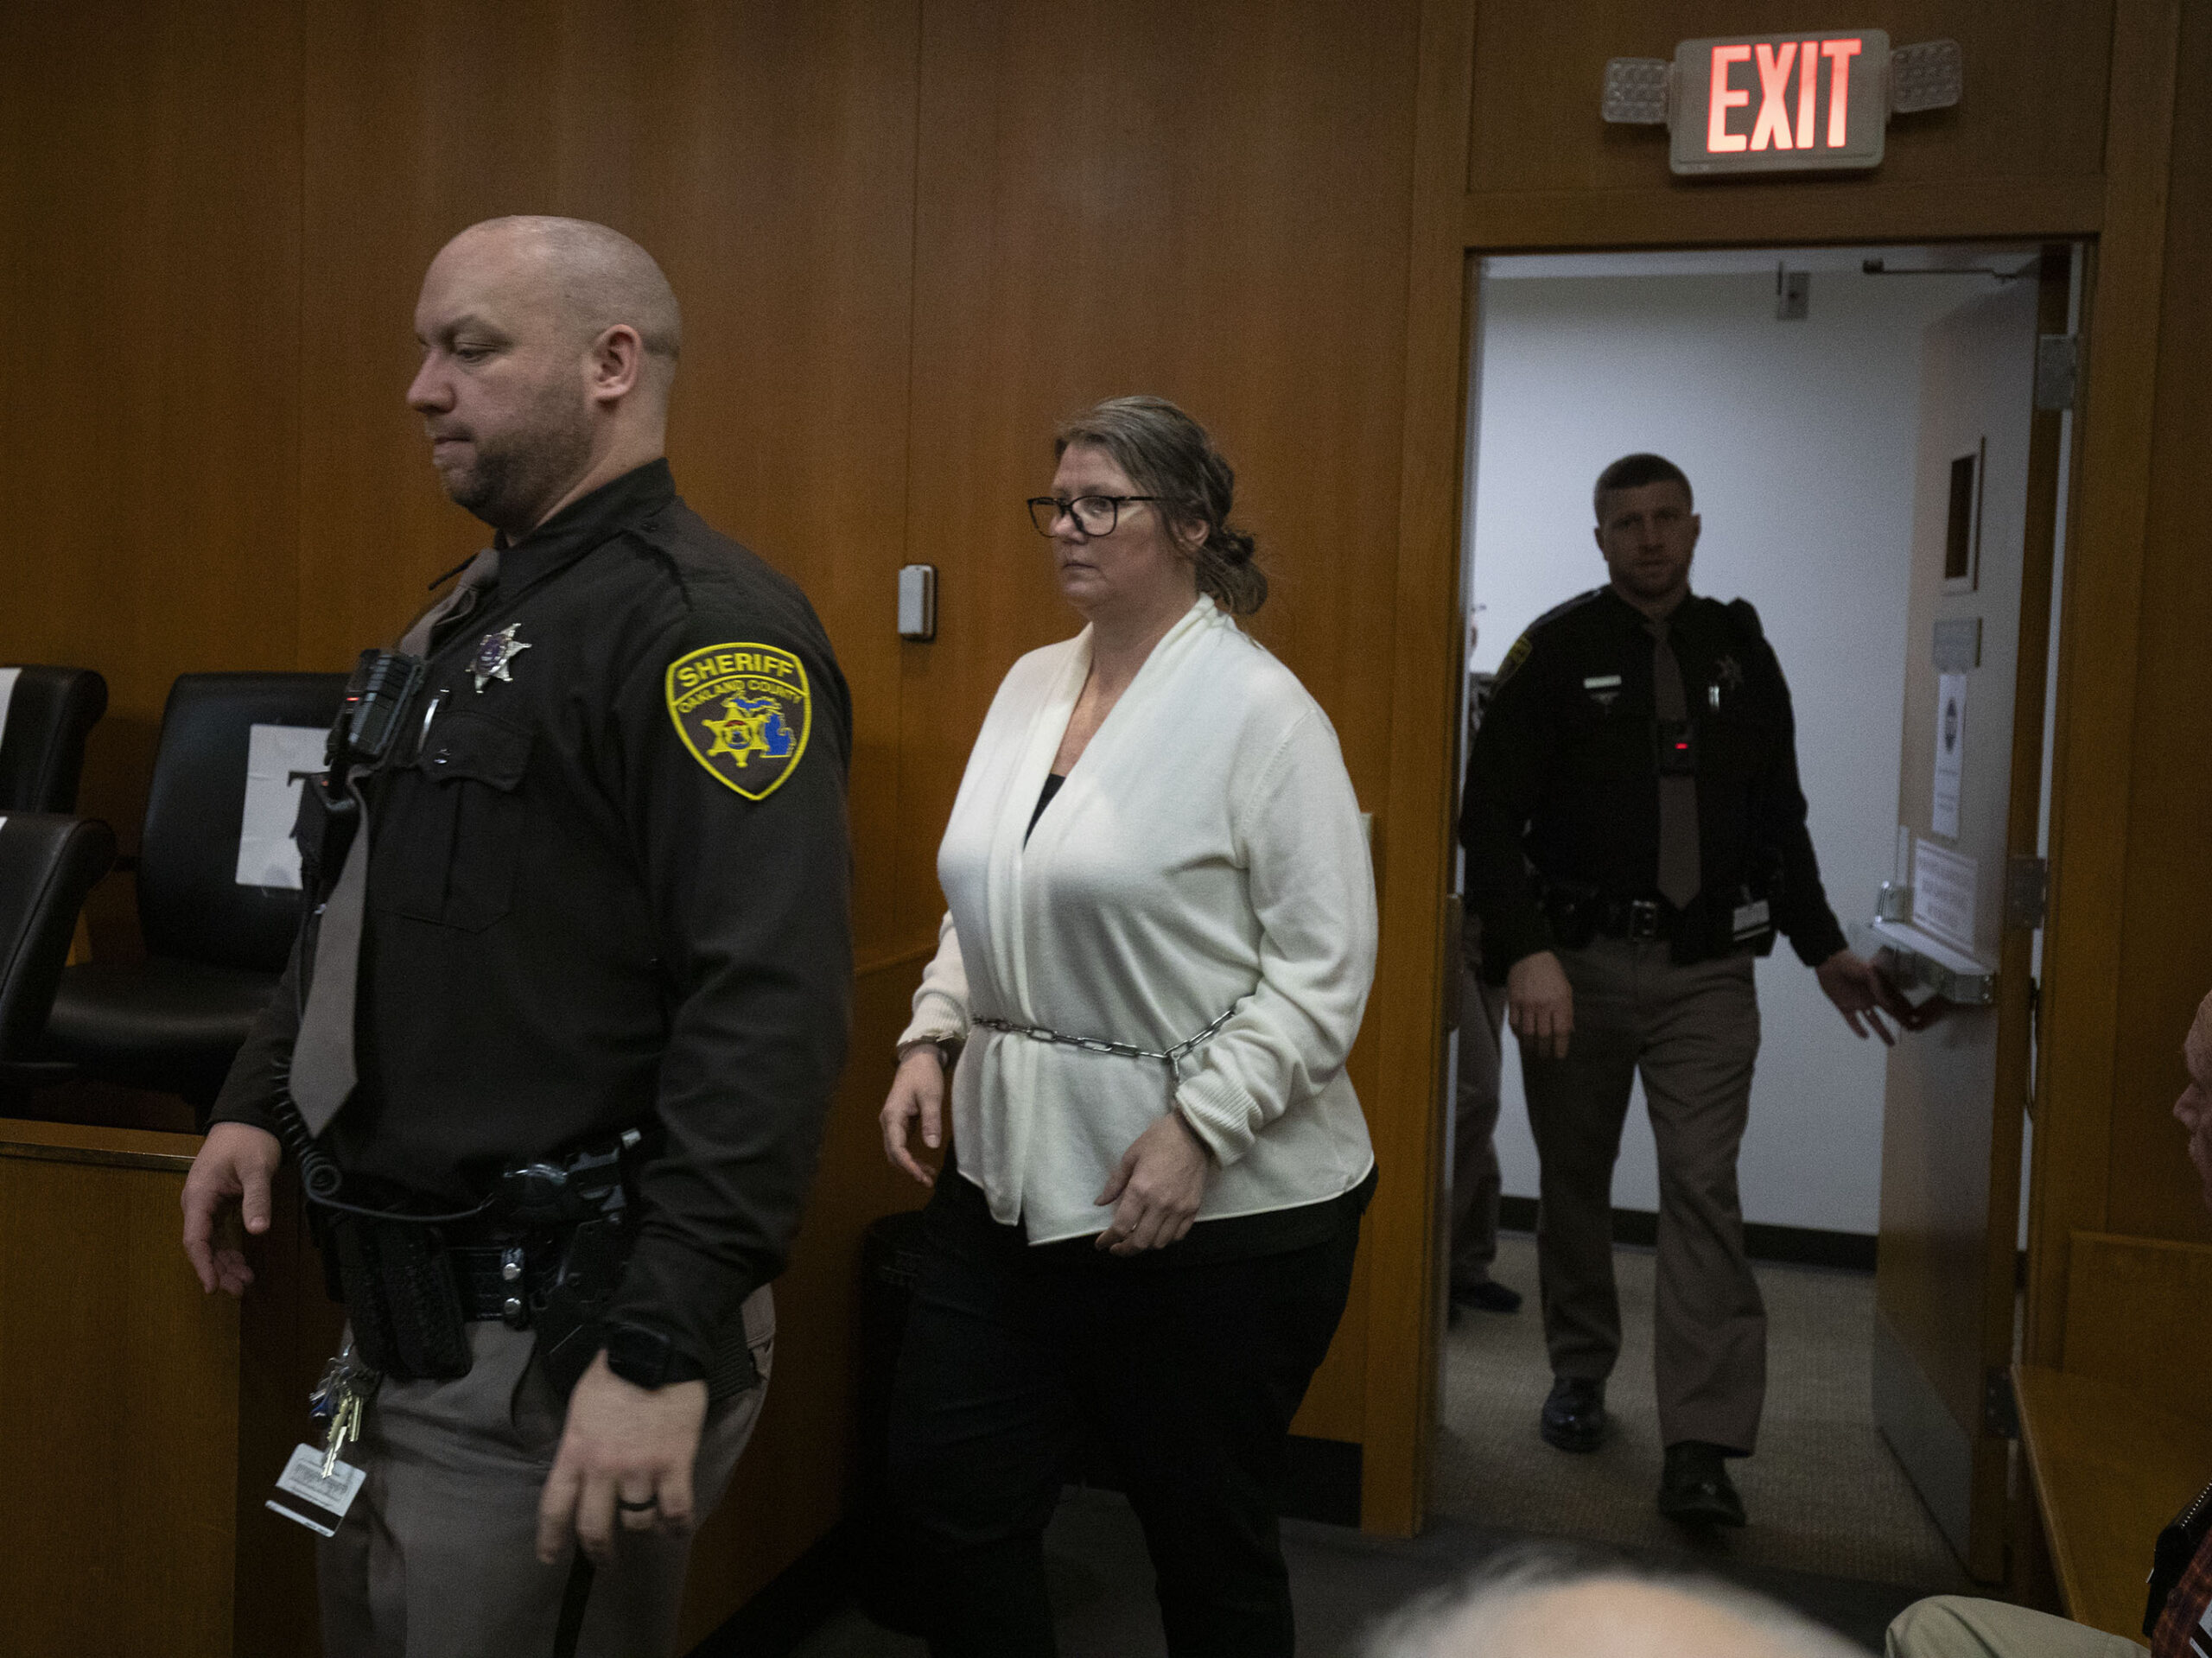 Jennifer Crumbley convicted of involuntary manslaughter over son’s school shooting